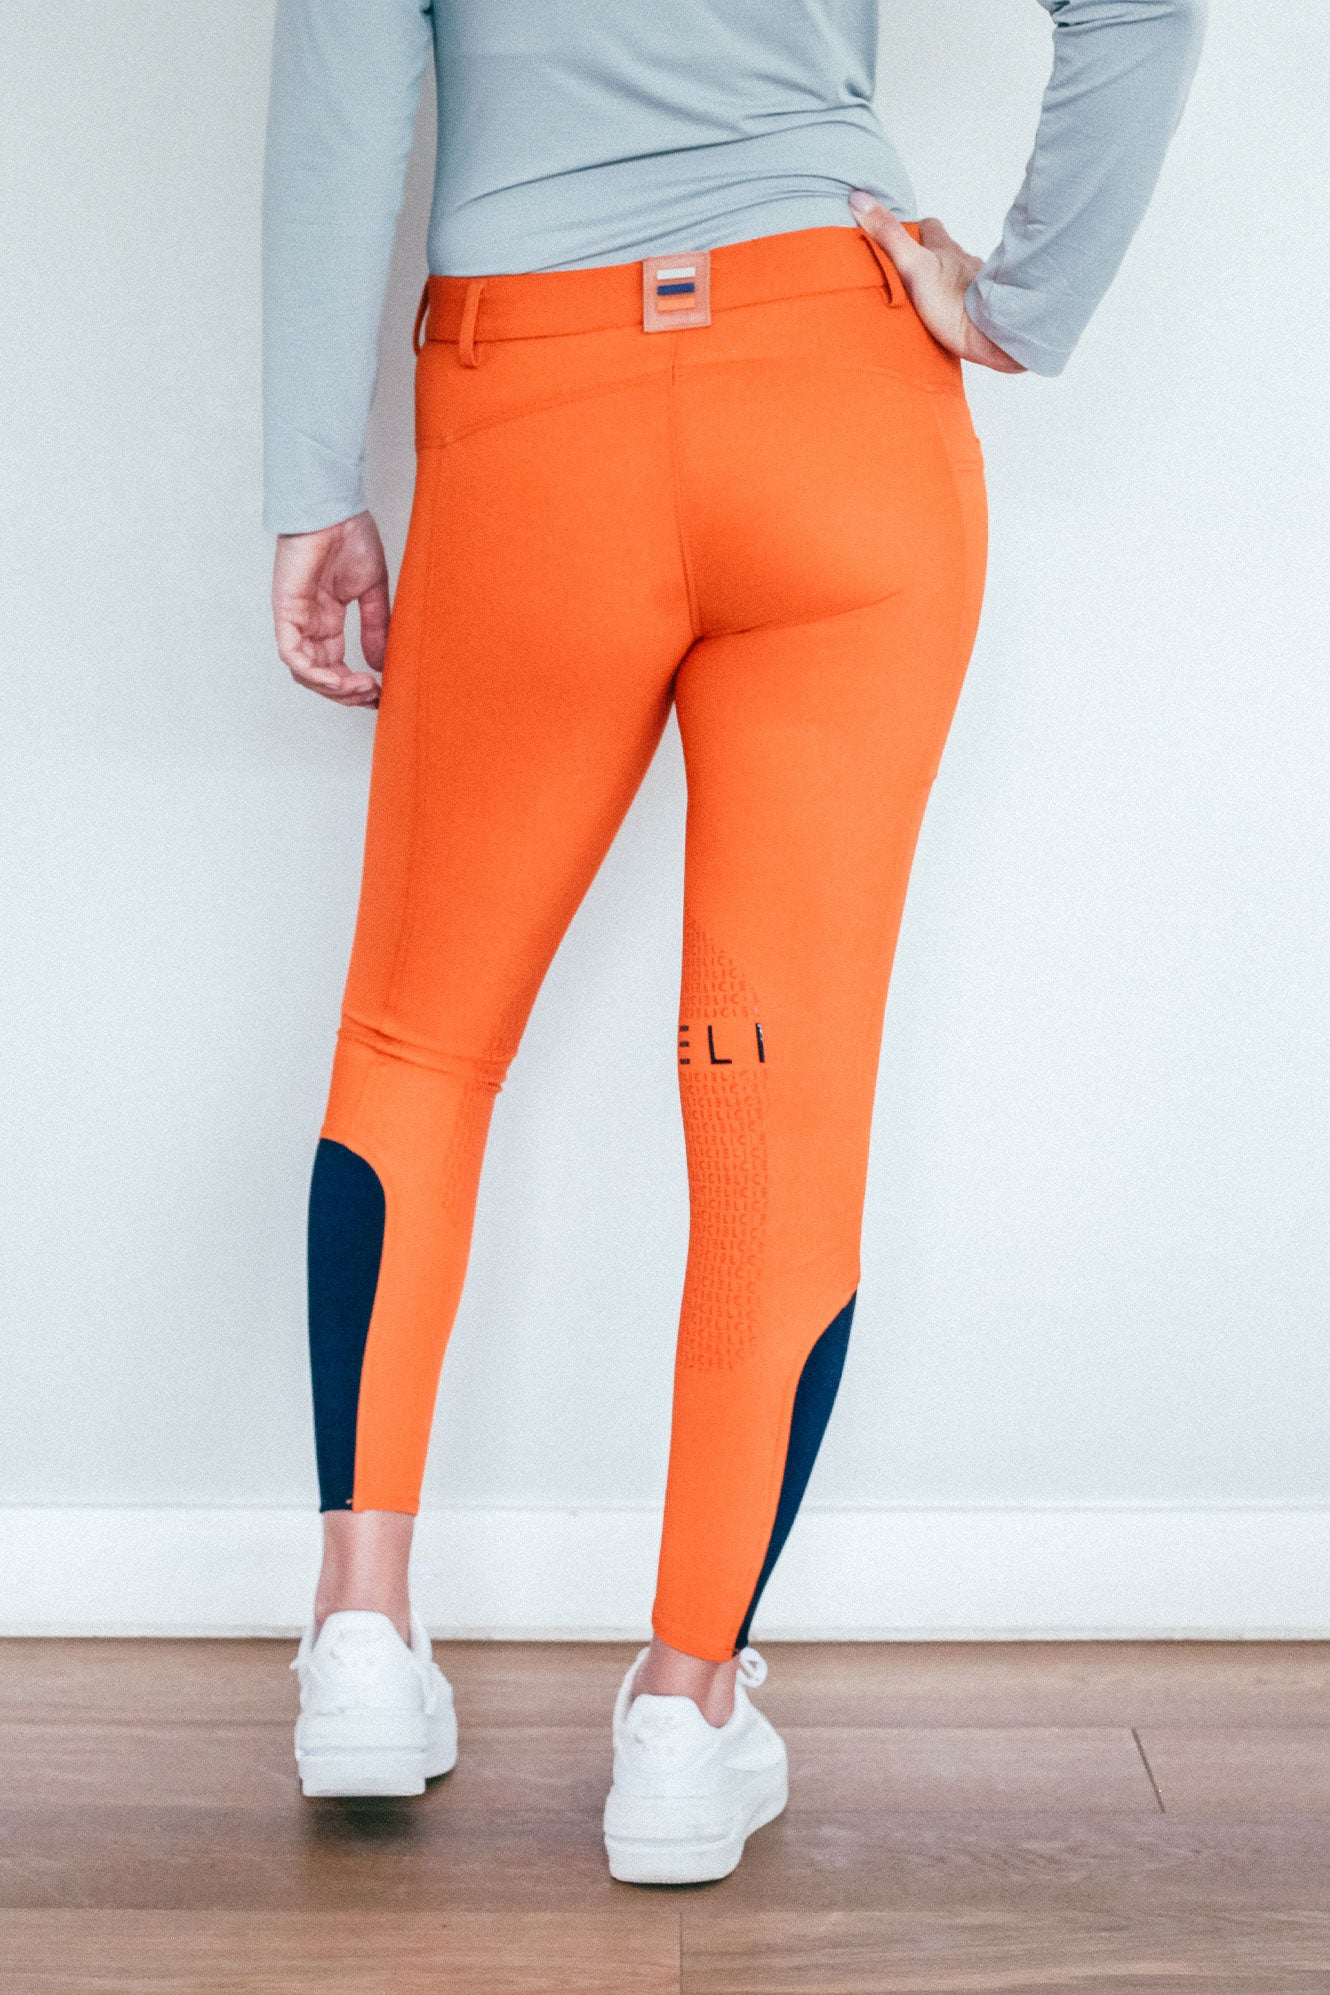 Womens Hip Lift Breeches For Horse Riding And Outdoor Equestrian Riding  Trousers From Xmlongbida, $15.26 | DHgate.Com